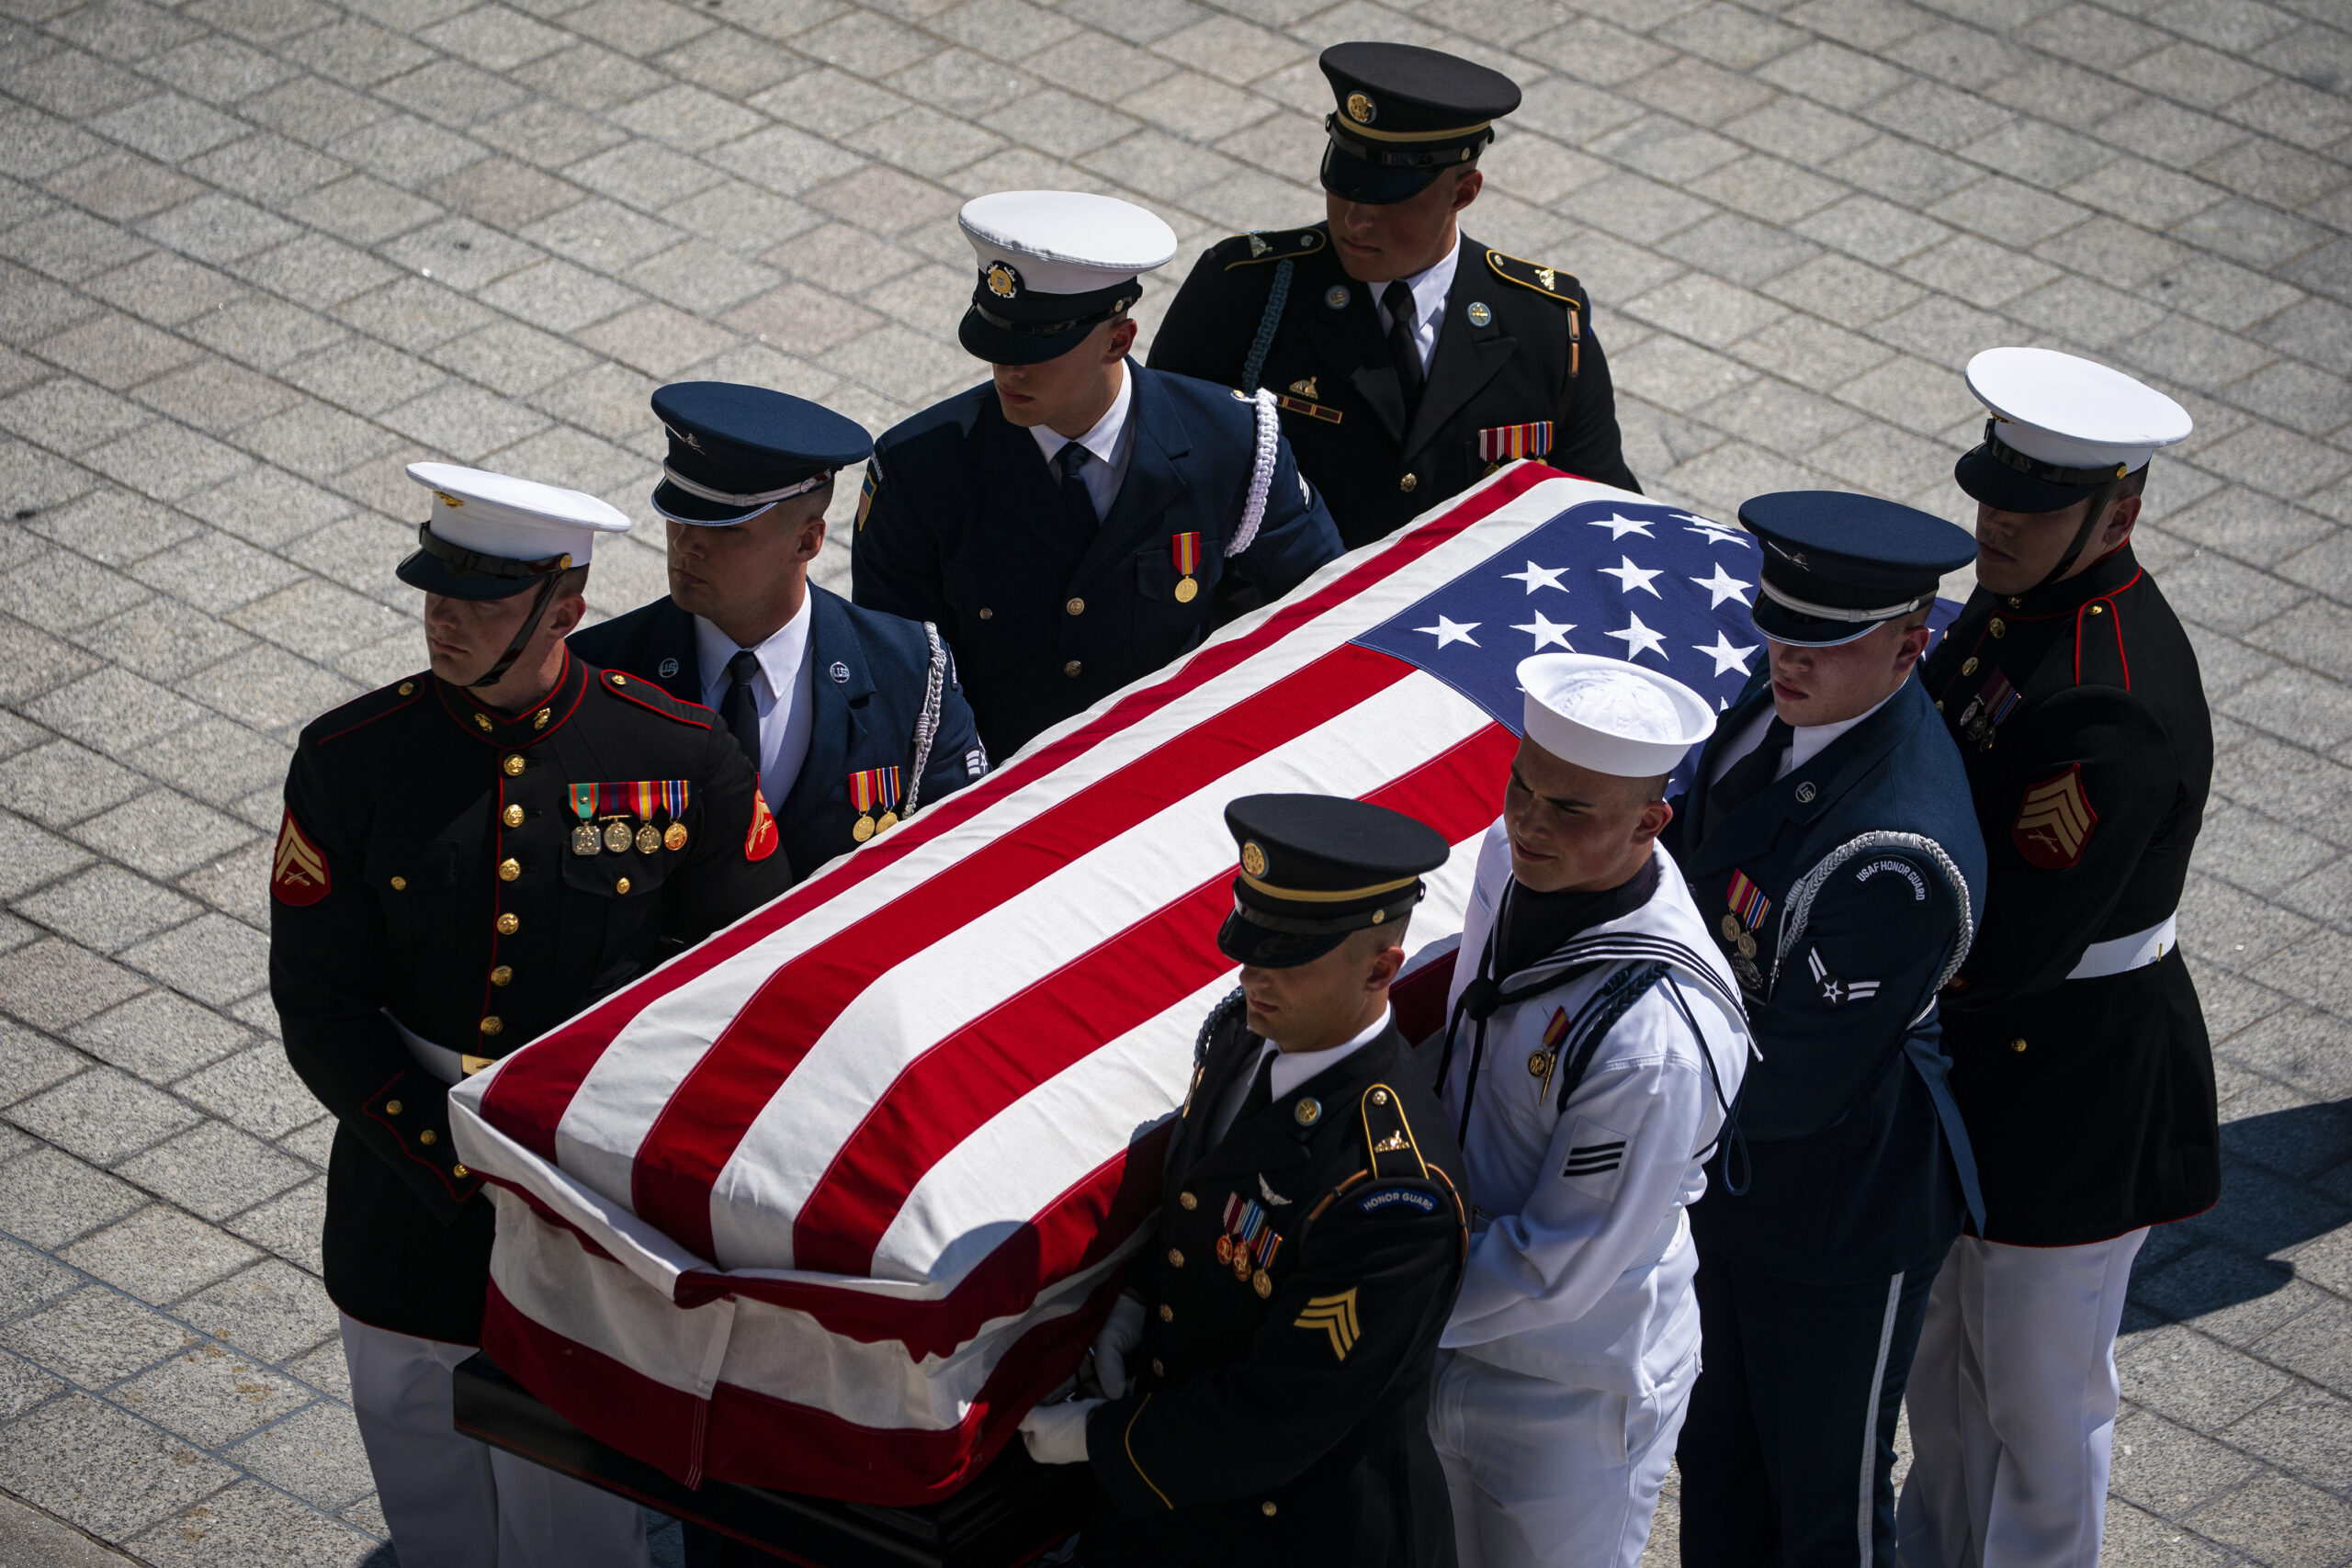 The flag-draped casket bearing the remains of Hershel W. “Woody” Williams is carried by joint service members into the U.S. Capitol, Thursday, July 14, 2022 in Washington, to lie in honor. Williams, the last remaining Medal of Honor recipient from World War II, died at age 98. (Al Drago/Pool Photo via AP)